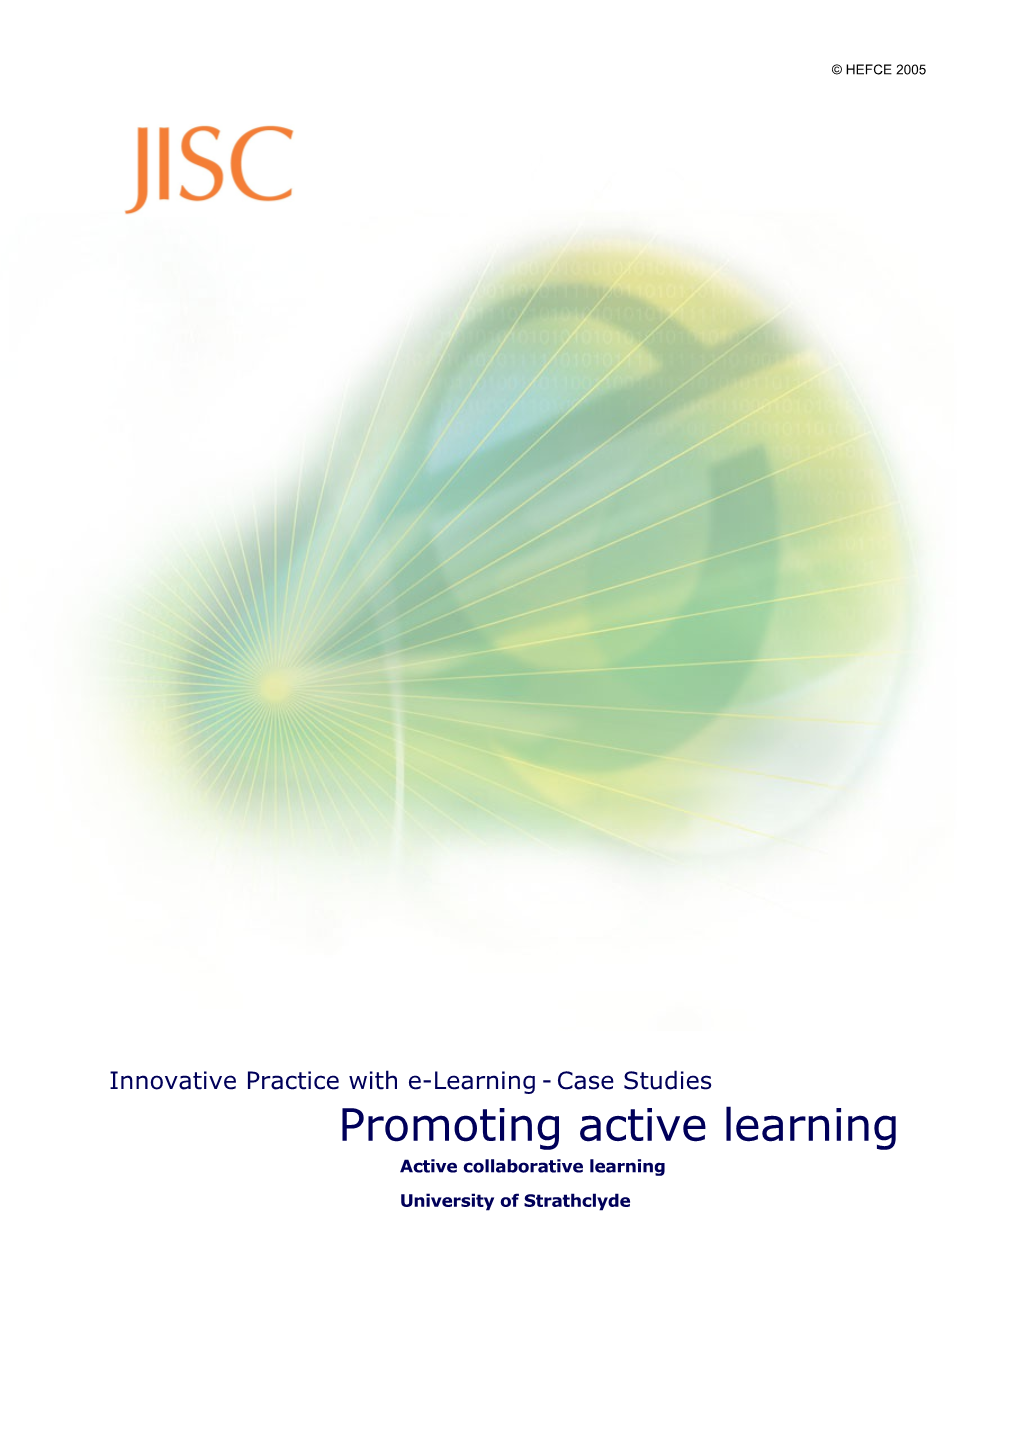 Promoting Active Learning